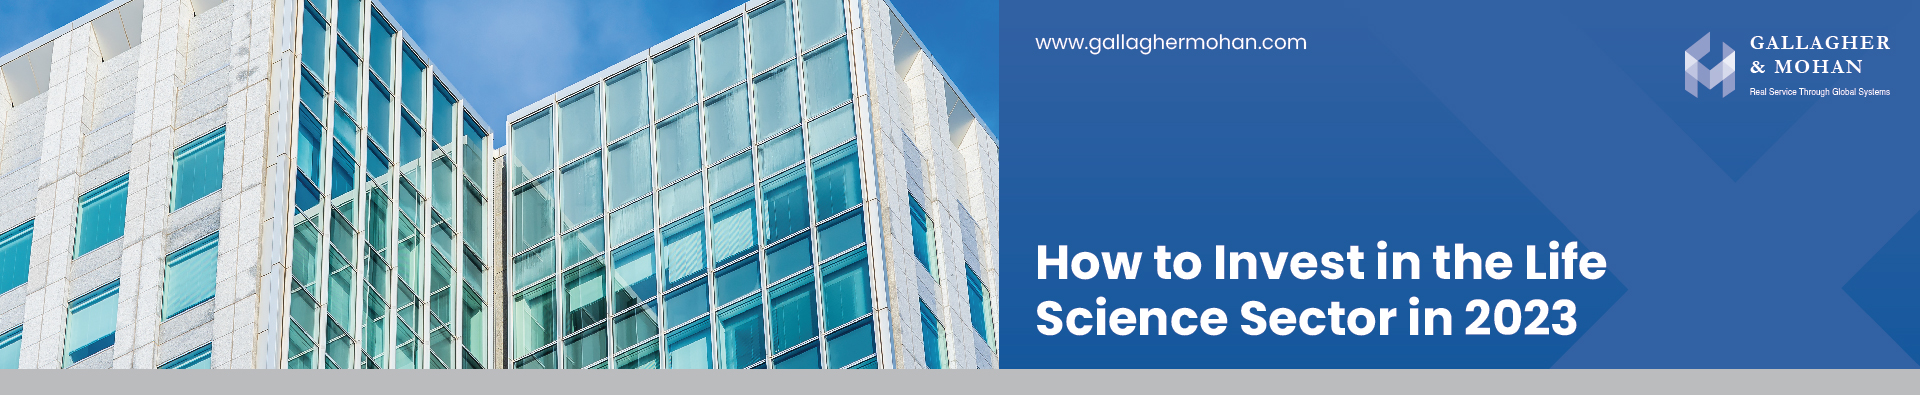 How To Invest In The Life Science Sector In 2023